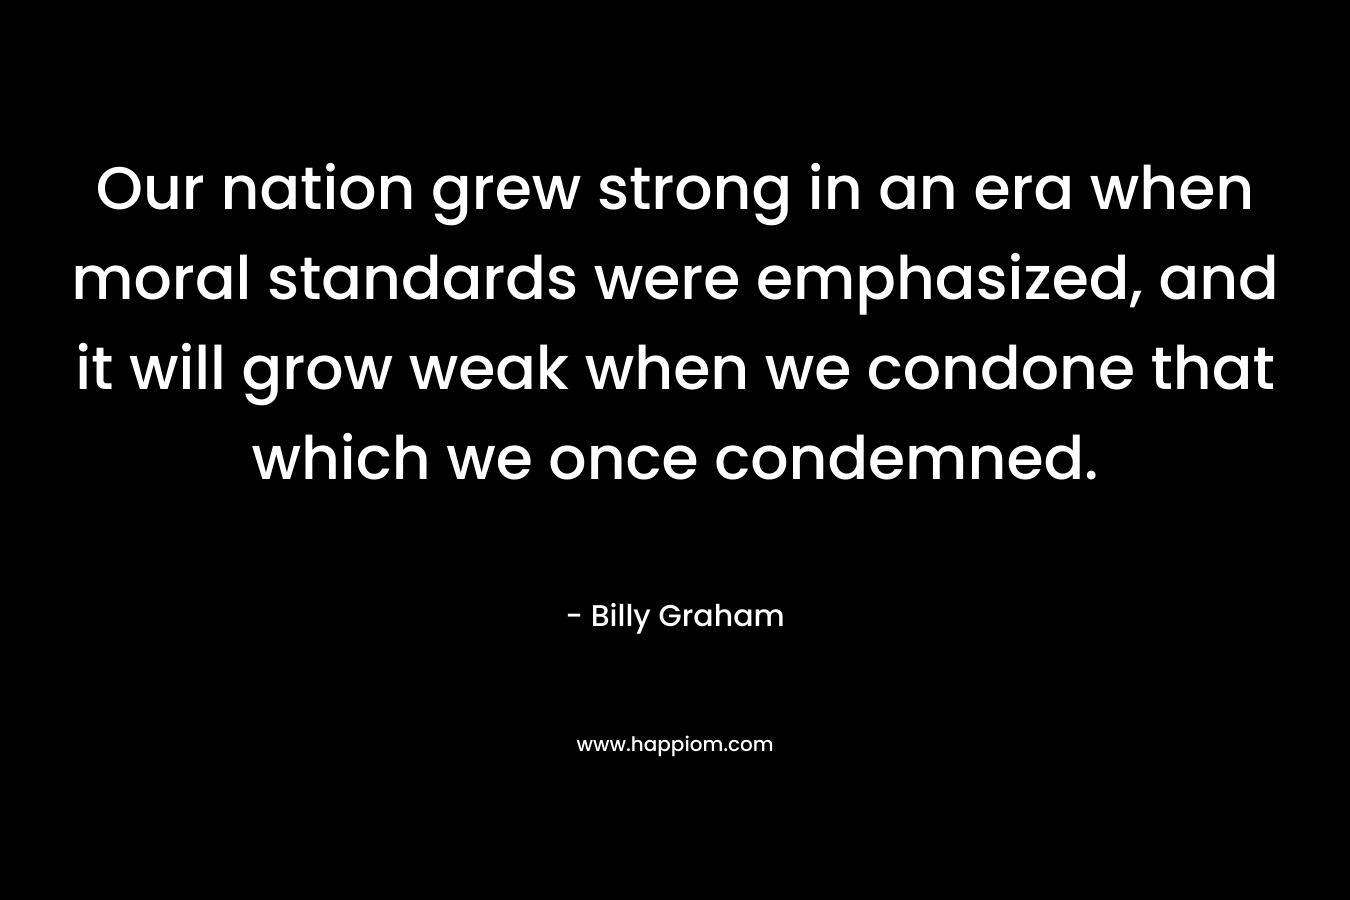 Our nation grew strong in an era when moral standards were emphasized, and it will grow weak when we condone that which we once condemned. – Billy Graham